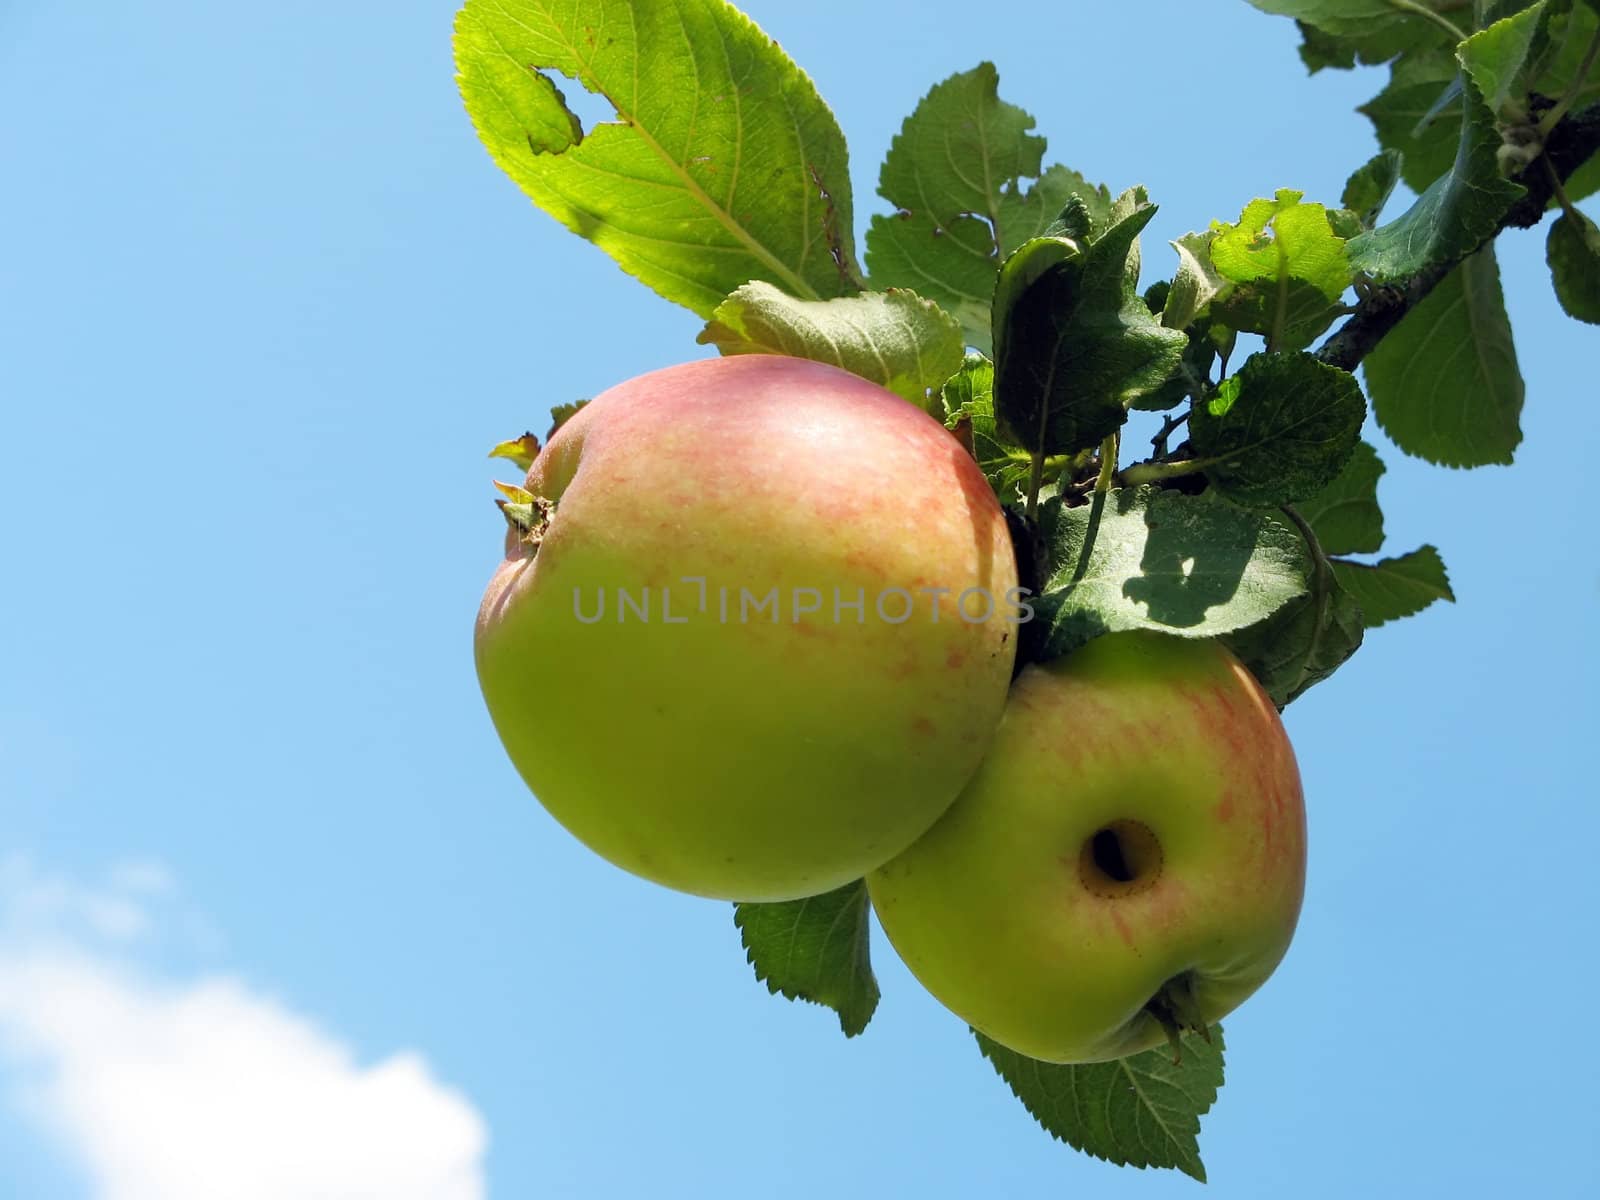 this image shows two apples with sky